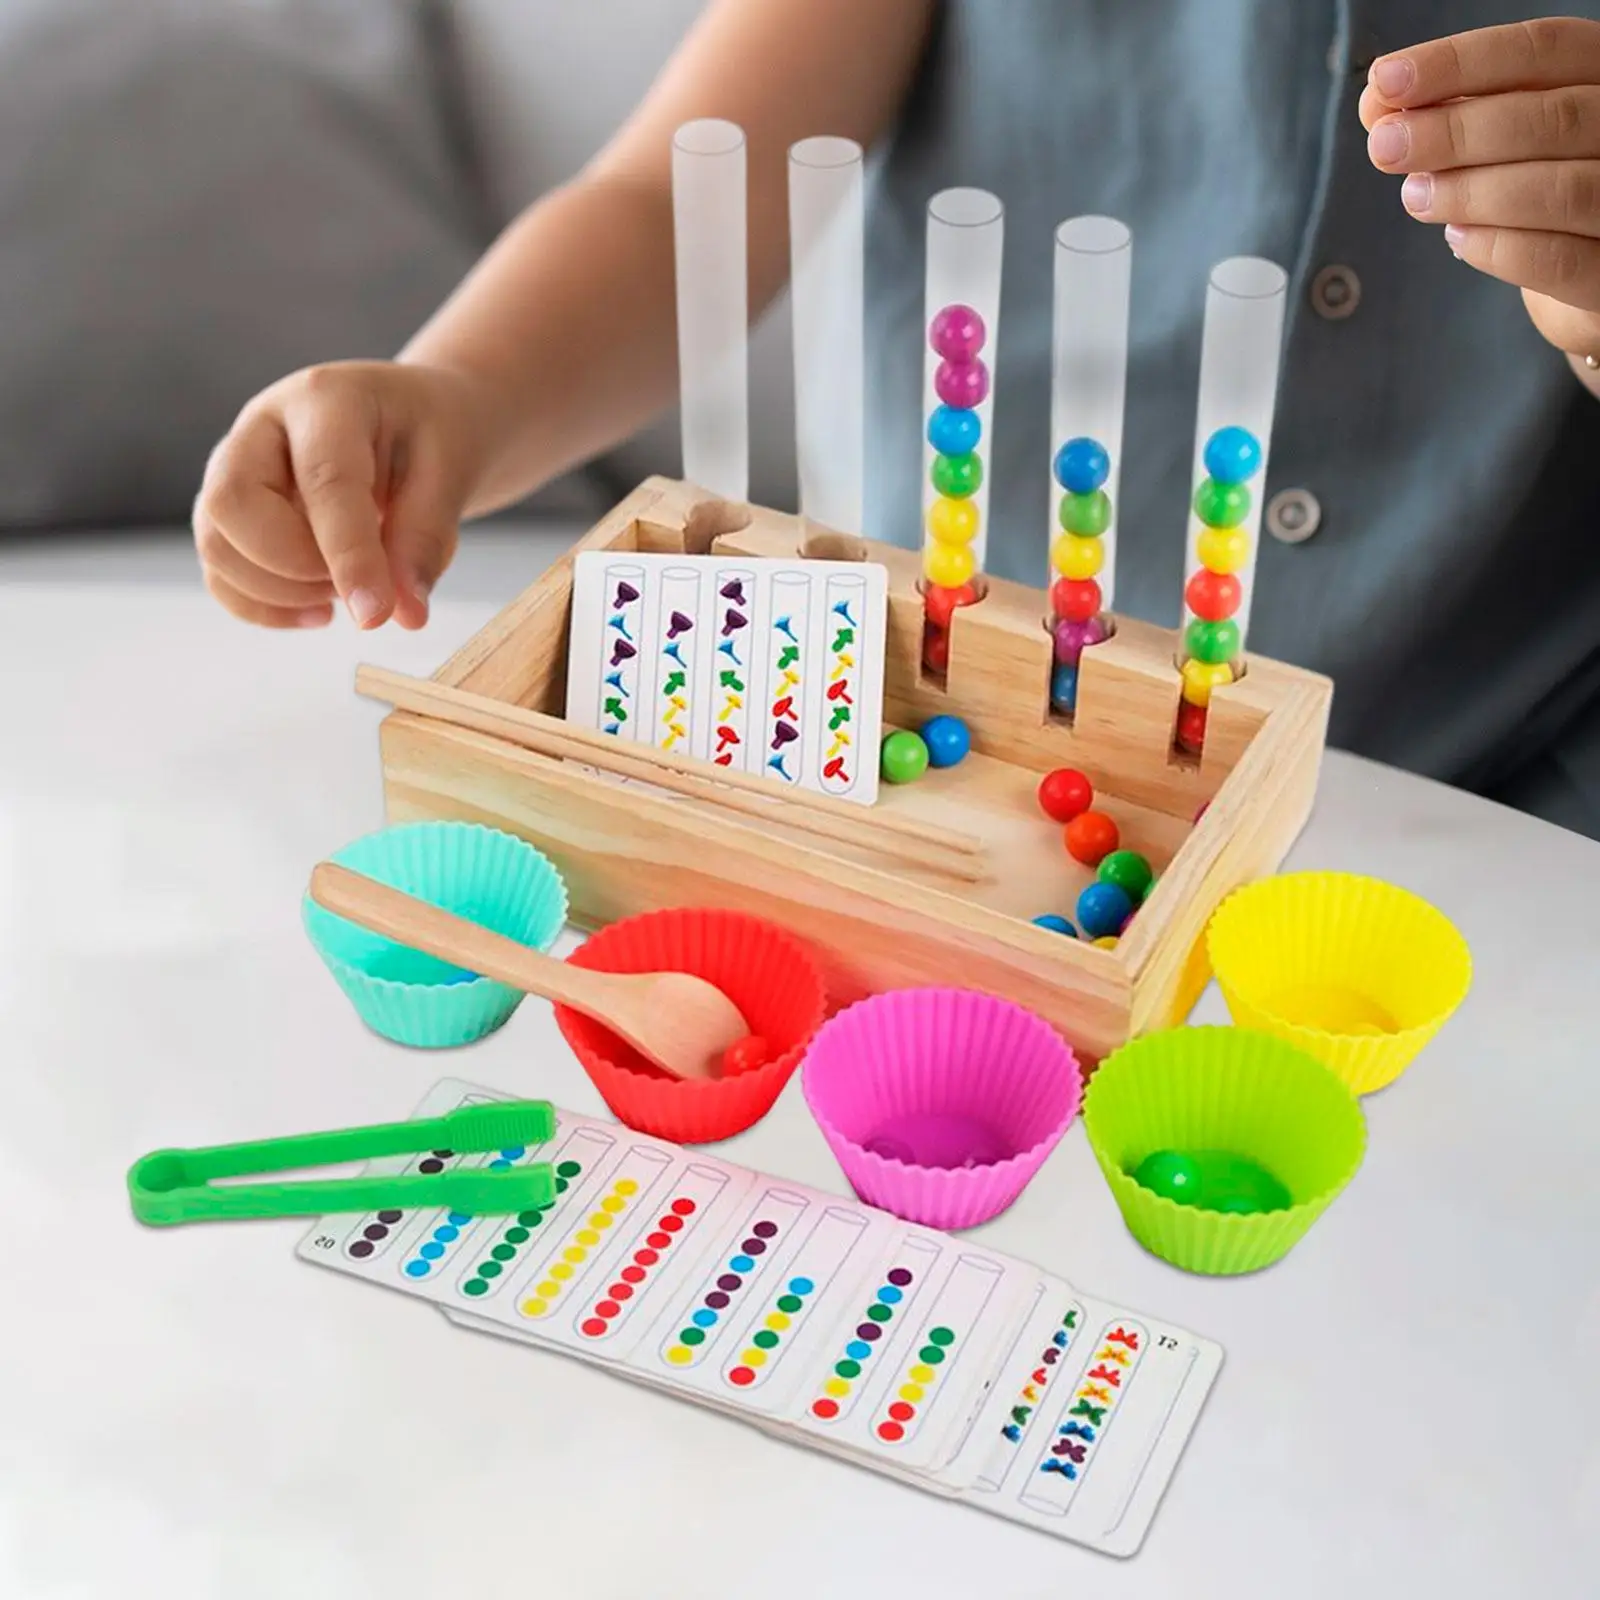 Wooden Peg Board Game Beads Game Wooden Rainbow Balls in Cups Montessori Toy for Children